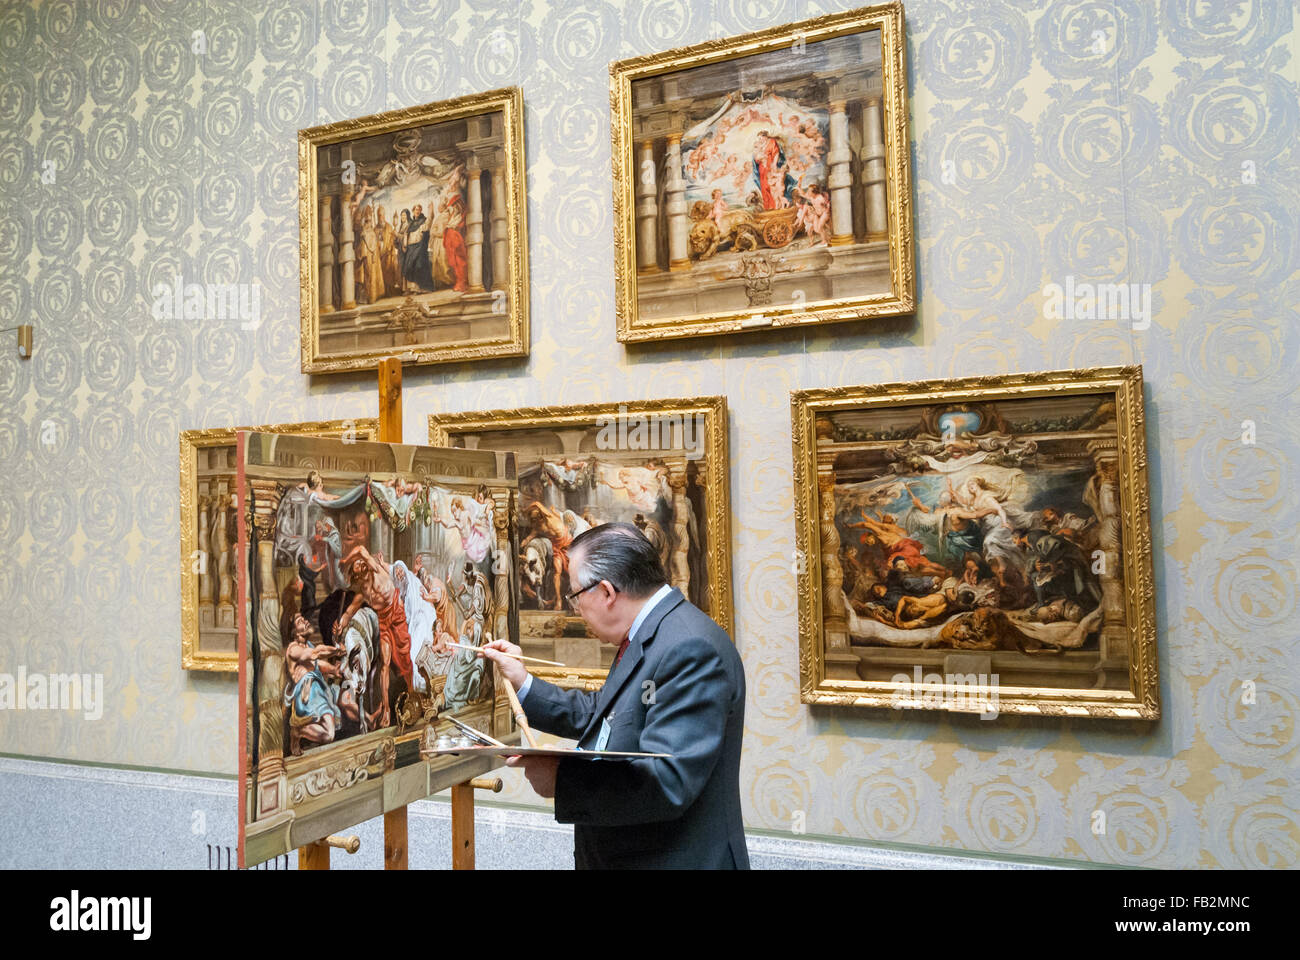 Artist copying old master oil painting in the Museo del Prado, Madrid, Spain Stock Photo